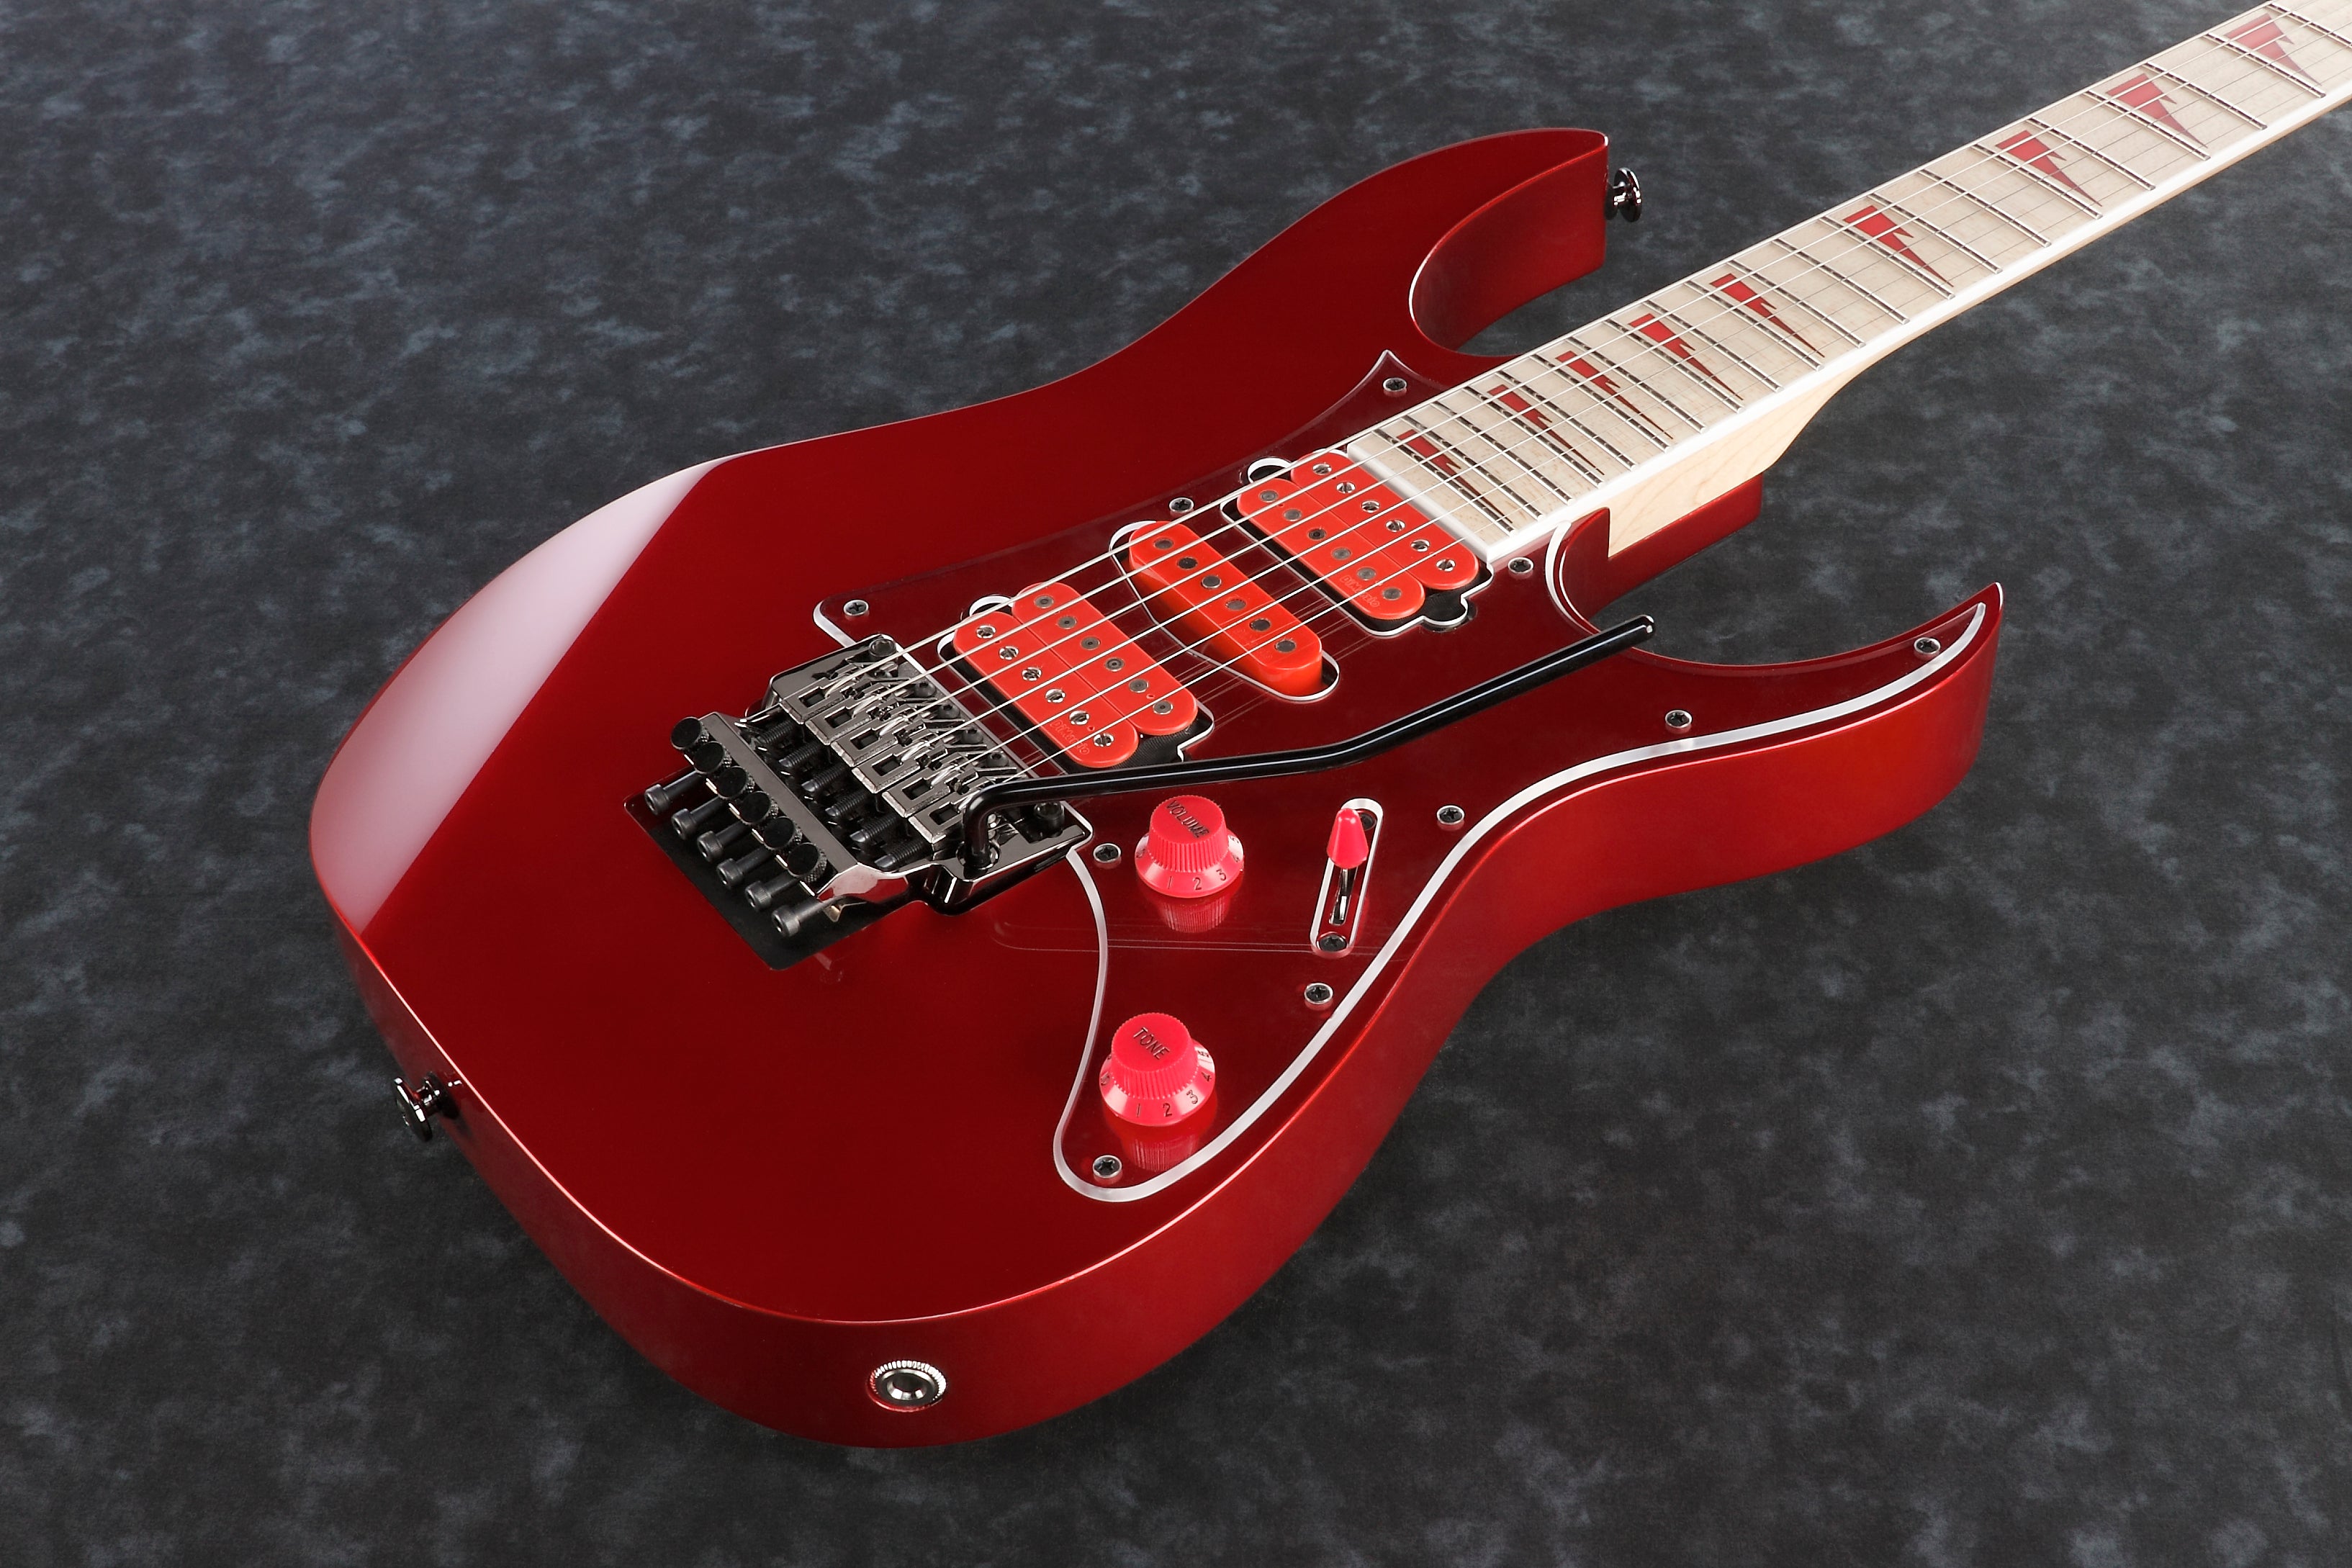 Ibanez RG3770DX CA Prestige (Candy Apple Red) Japan Made Electric Guitar 電結他